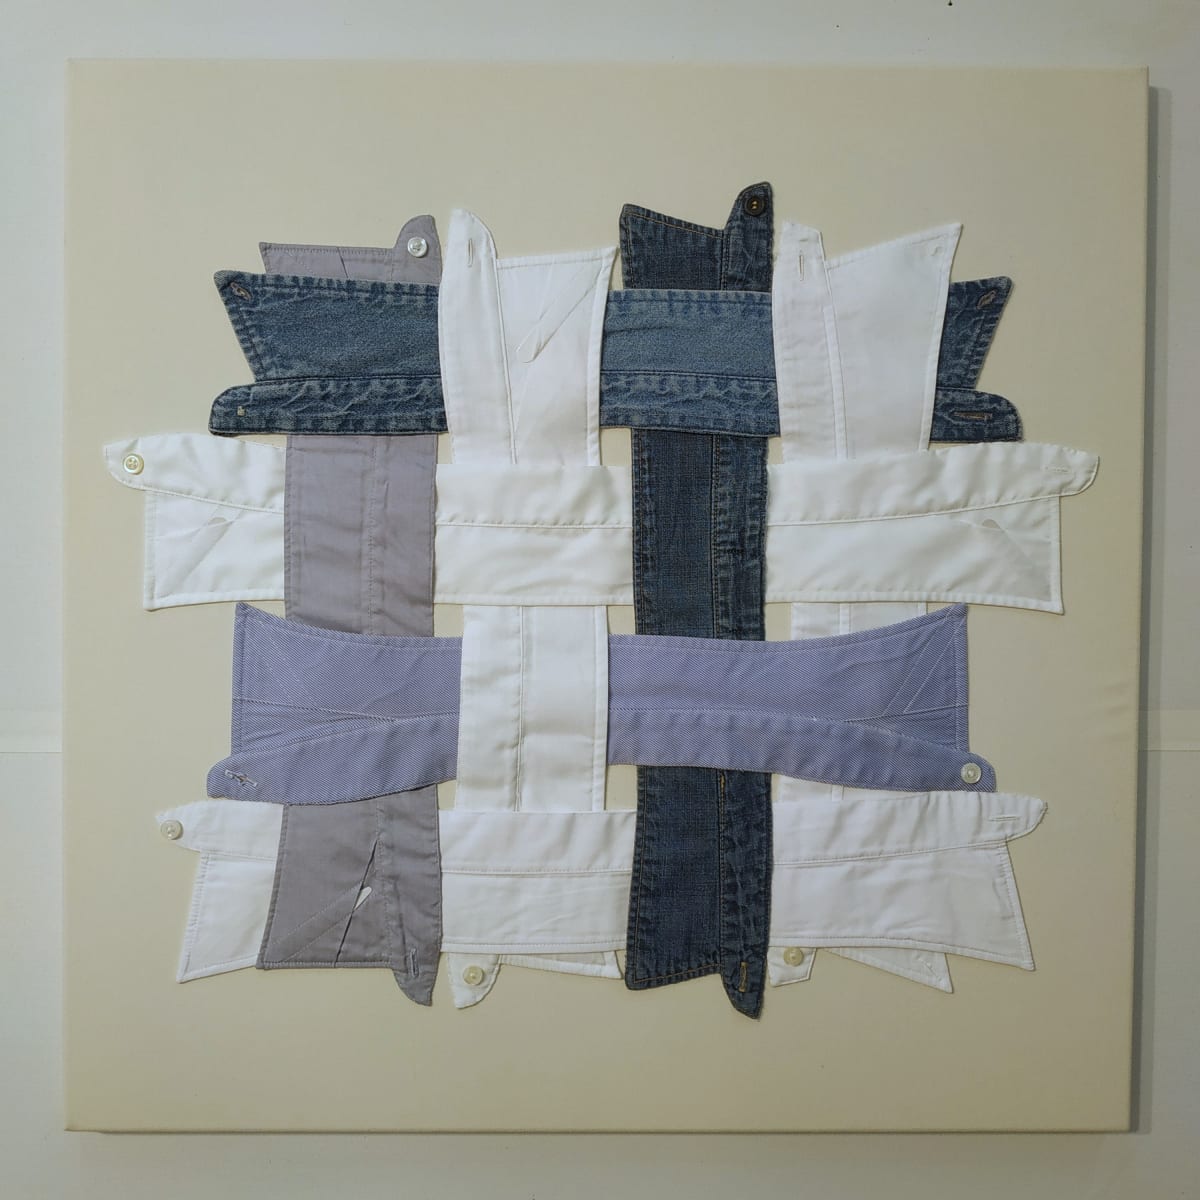 Interdependence by Lesley Turner  Image: Lesley Turner, 'Interdependence', 2020, 24"h x 24"w x 0.5"d. Men's cotton shirt collars, worn bedsheet, polyester thread.  A society woven from the threads of cooperation, shared responsibilities, and collaborative efforts, 